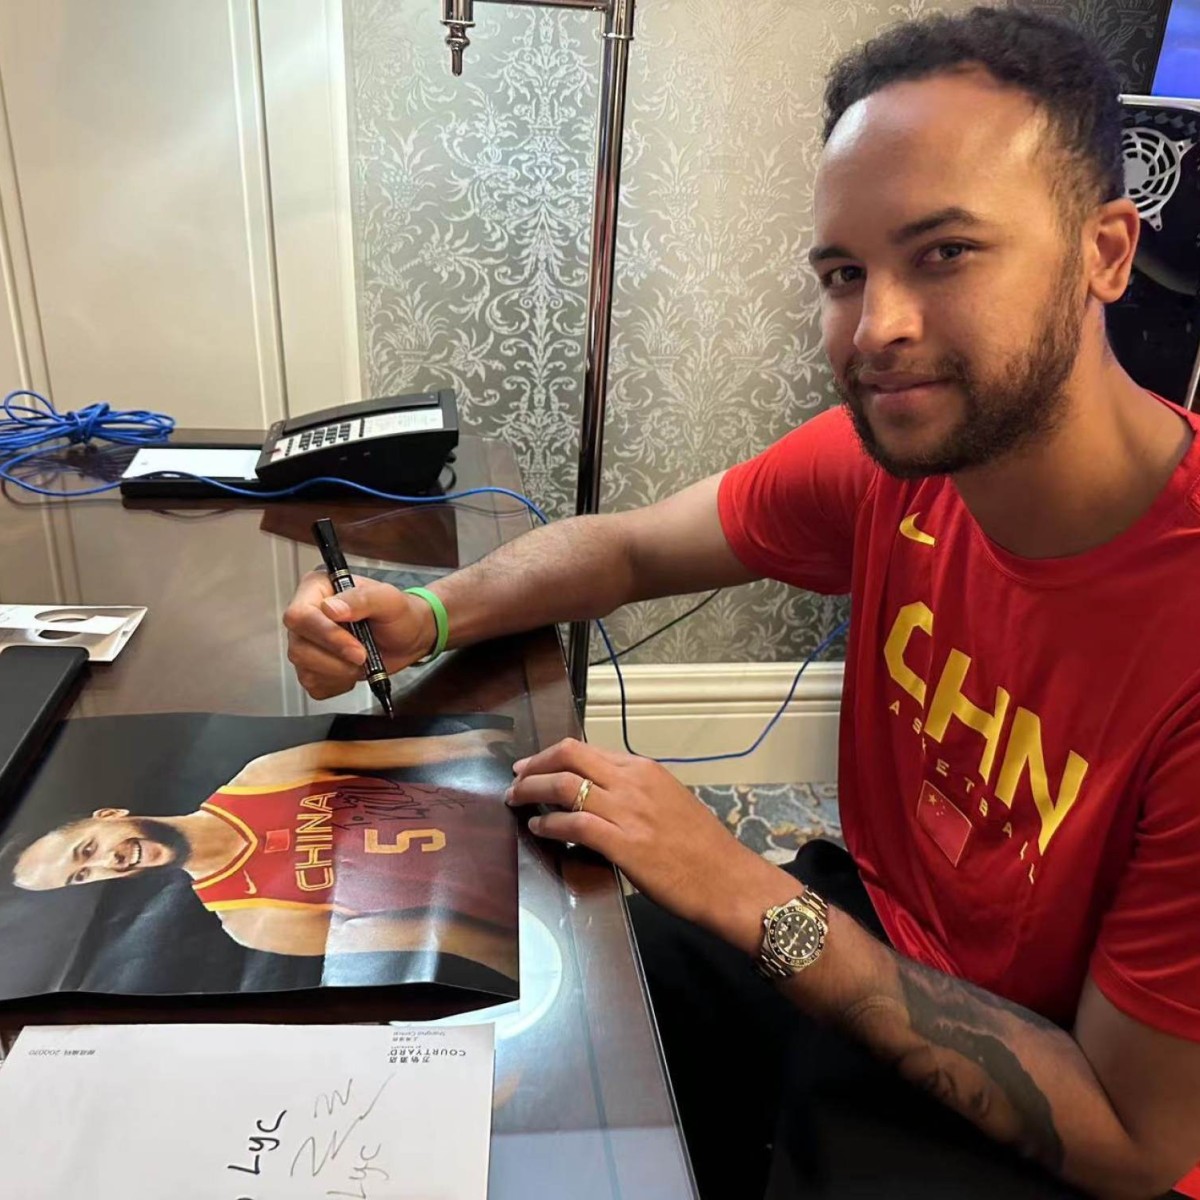 NBA player Kyle Anderson obtains Chinese citizenship ahead of Fiba World  Cup